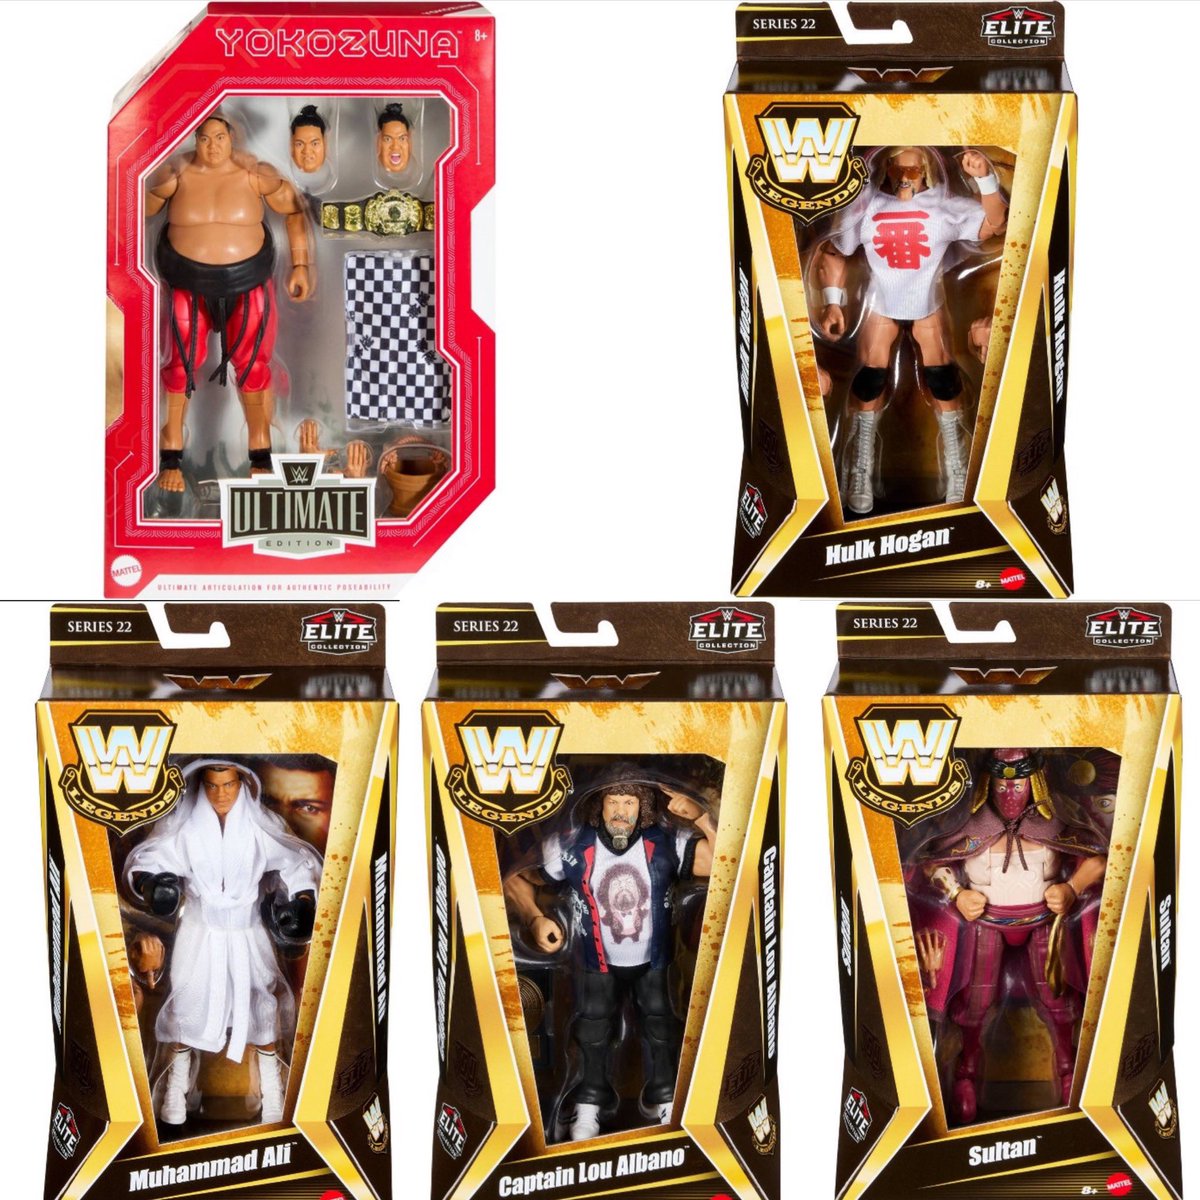 🎯NEW WWE IN-STOCK🎯

#PAIDLINK the new #WWE legends are in-stock on the @target app for shipping and in-store pickup. #TargetAffiliate link below. 

goto.target.com/KjNjBz

#toys #wweelitesquad #wrestling #wrestlingfigures #mattel #wweuniverse #targetfinds #collectibles